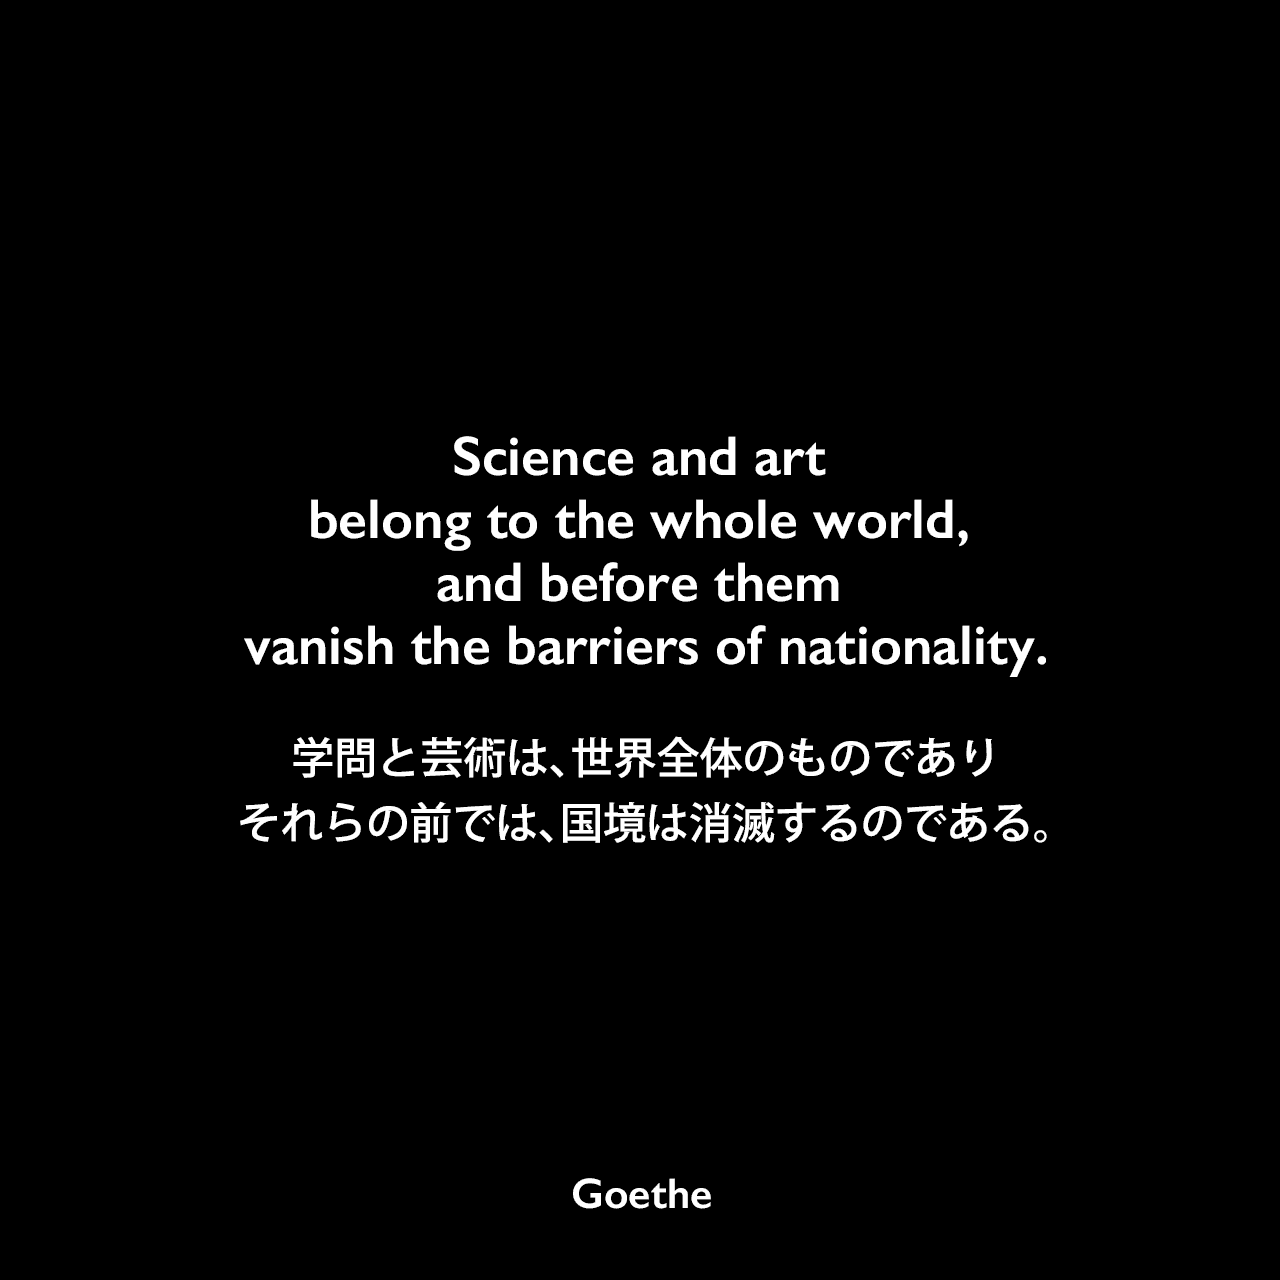 Science and art belong to the whole world, and before them vanish the barriers of nationality.学問と芸術は、世界全体のものであり、それらの前では、国境は消滅するのである。Johann Wolfgang von Goethe